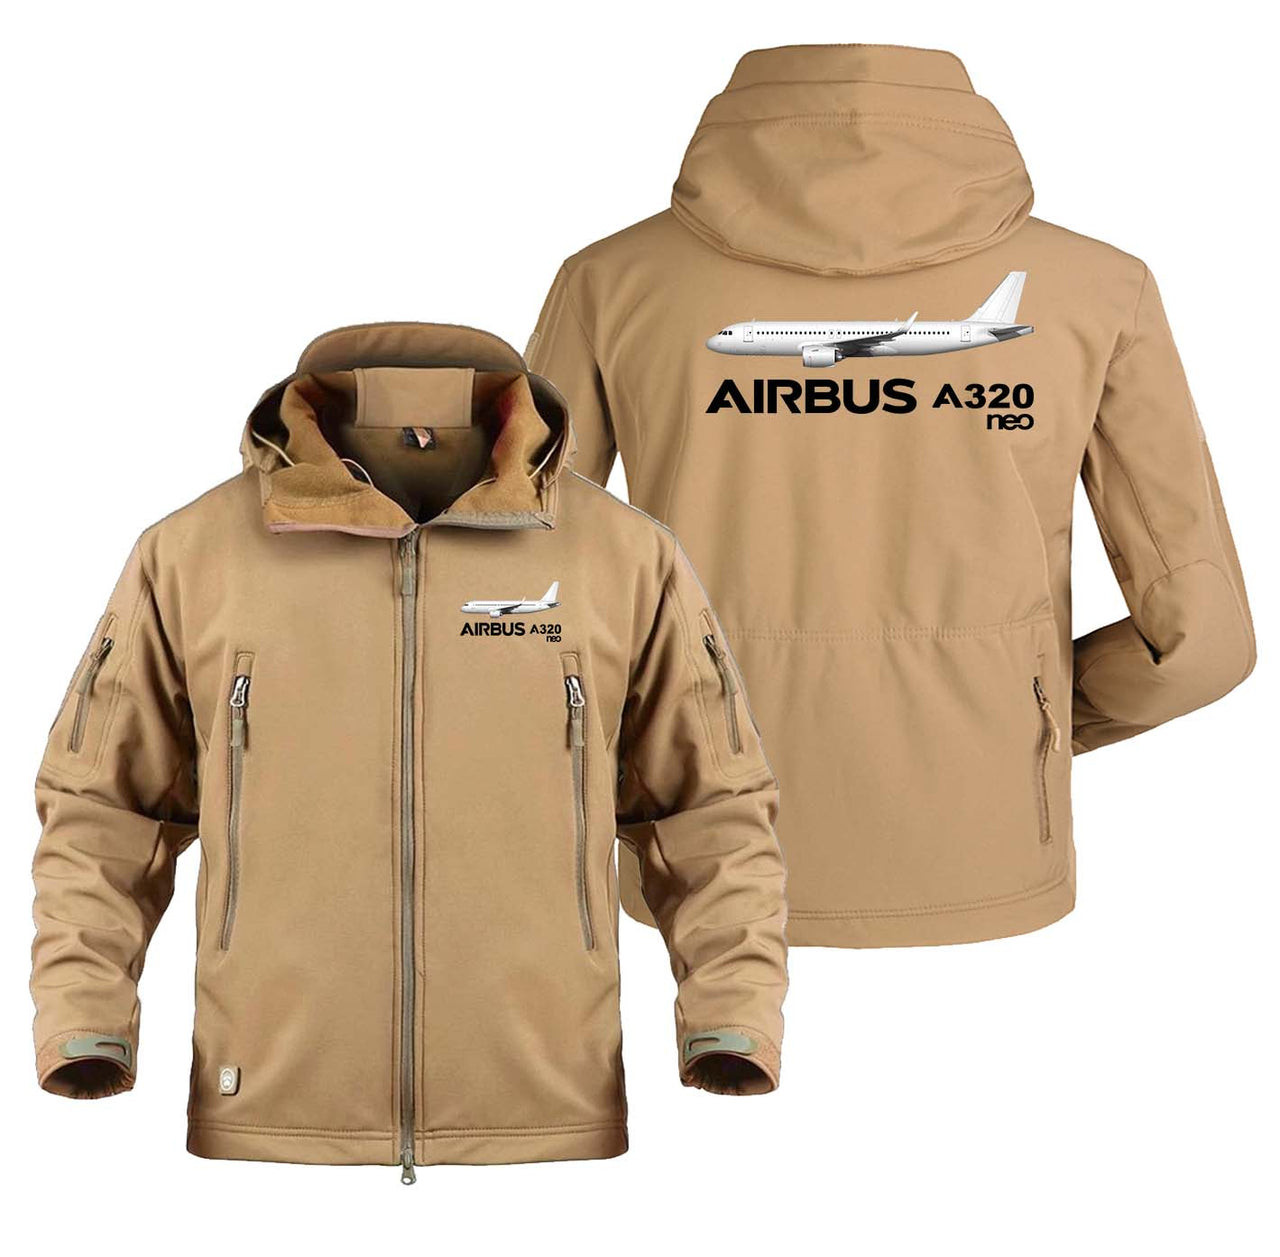 The Airbus A320neo Designed Military Jackets (Customizable)